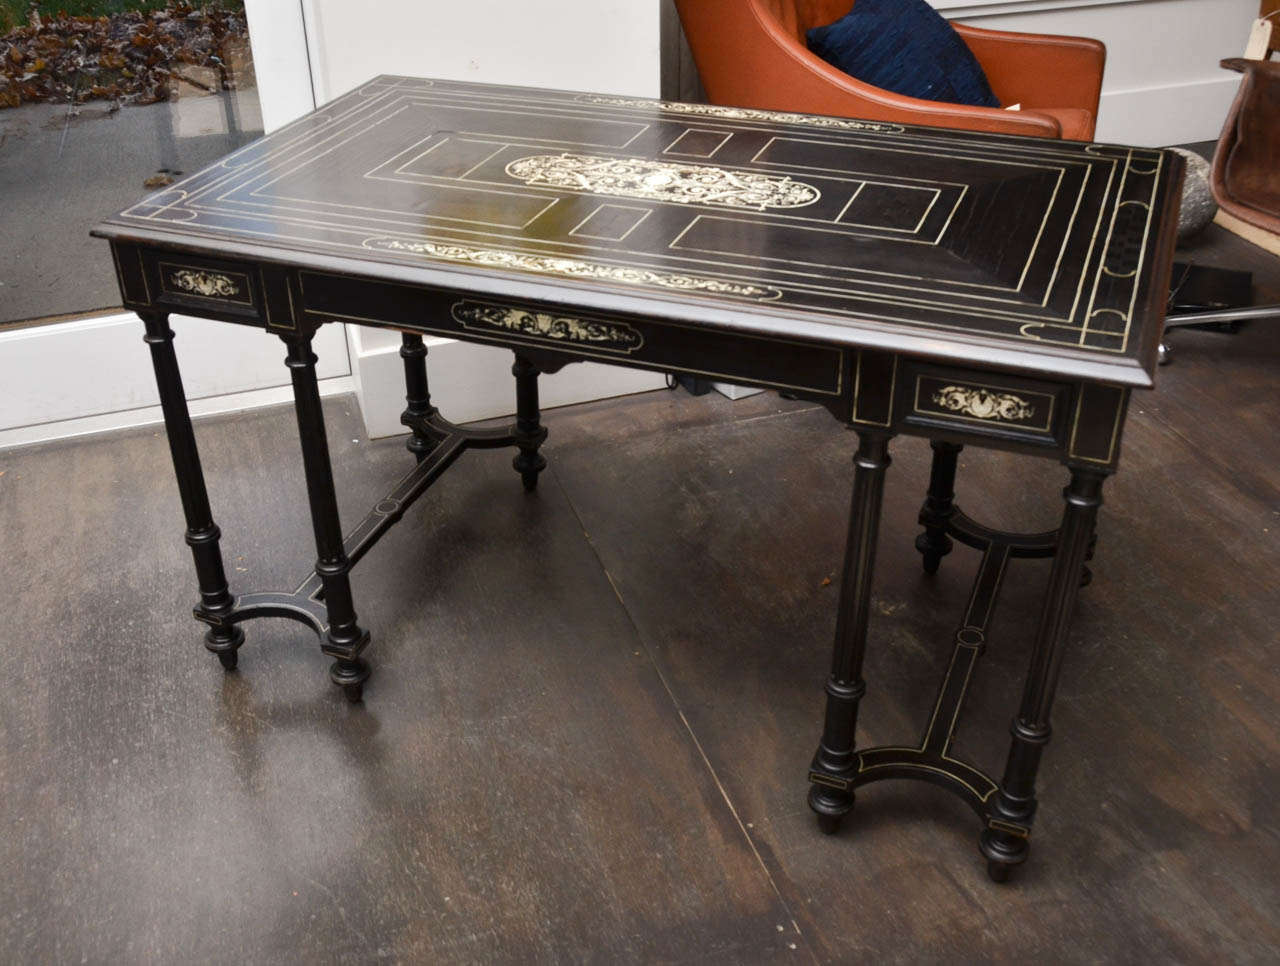 Beautiful ebonized Italian desk with delicate ivory inlay an parquet detailing. Two side drawers have locks with skeleton keys.